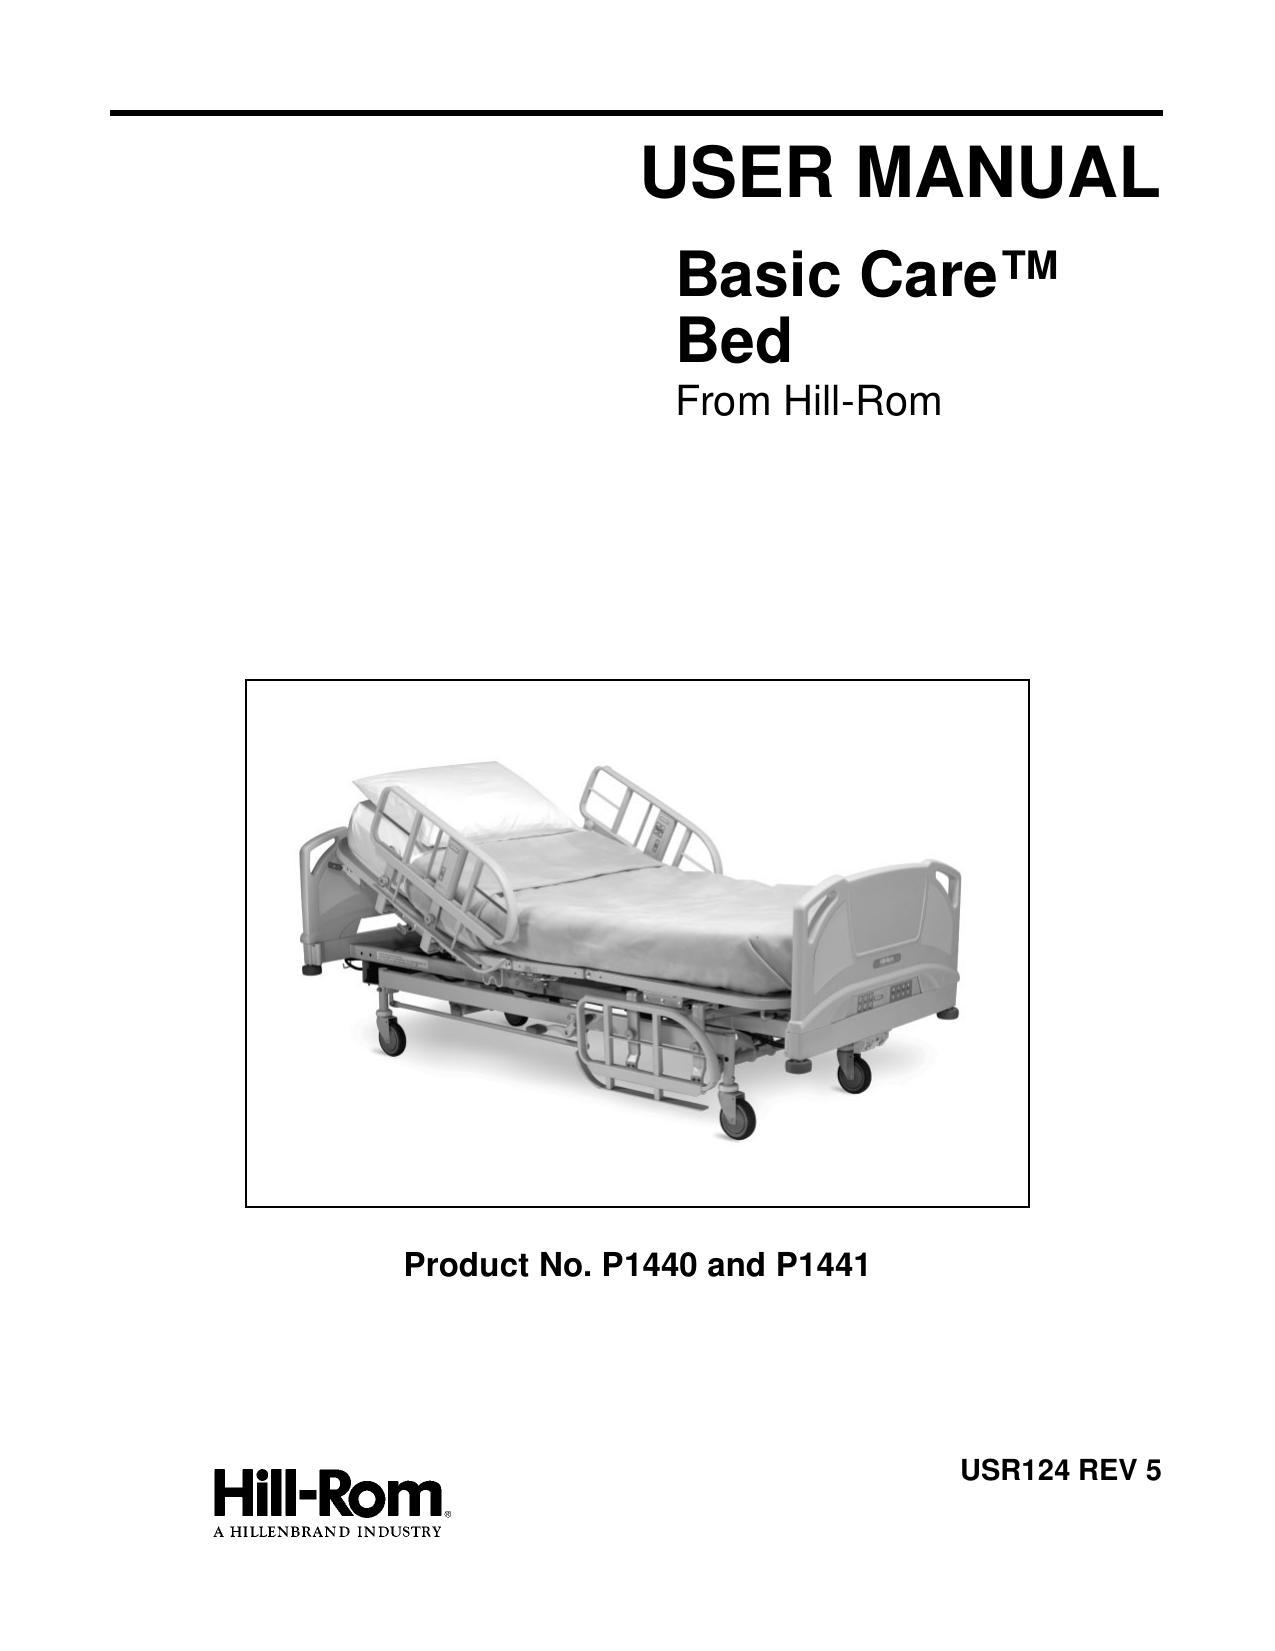 user-manual-basic-caretm-bed-from-hill-rom-product-no-p1440-and-p1441.pdf